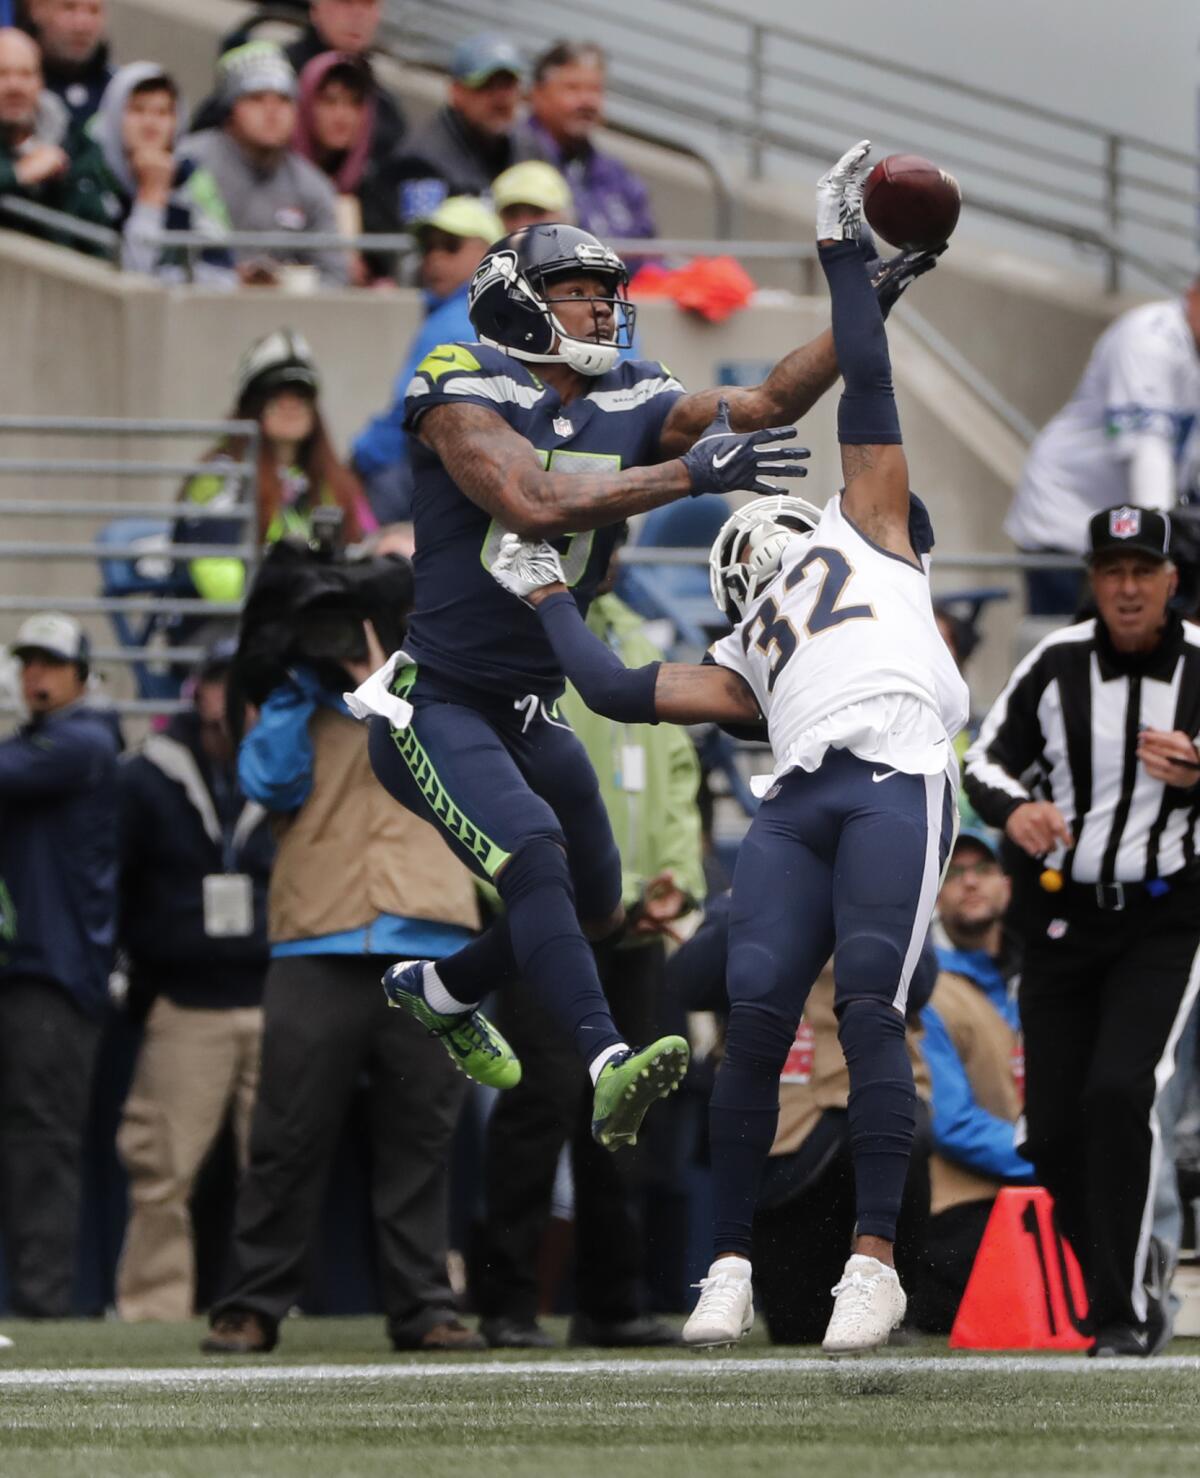 Rams cornerback Troy Hill (32) blocks a pass intended for Seattle Seahawks wide receiver Brandon Marshall (15) in the first half at CenturyLink Field on Sunday in Seattle.